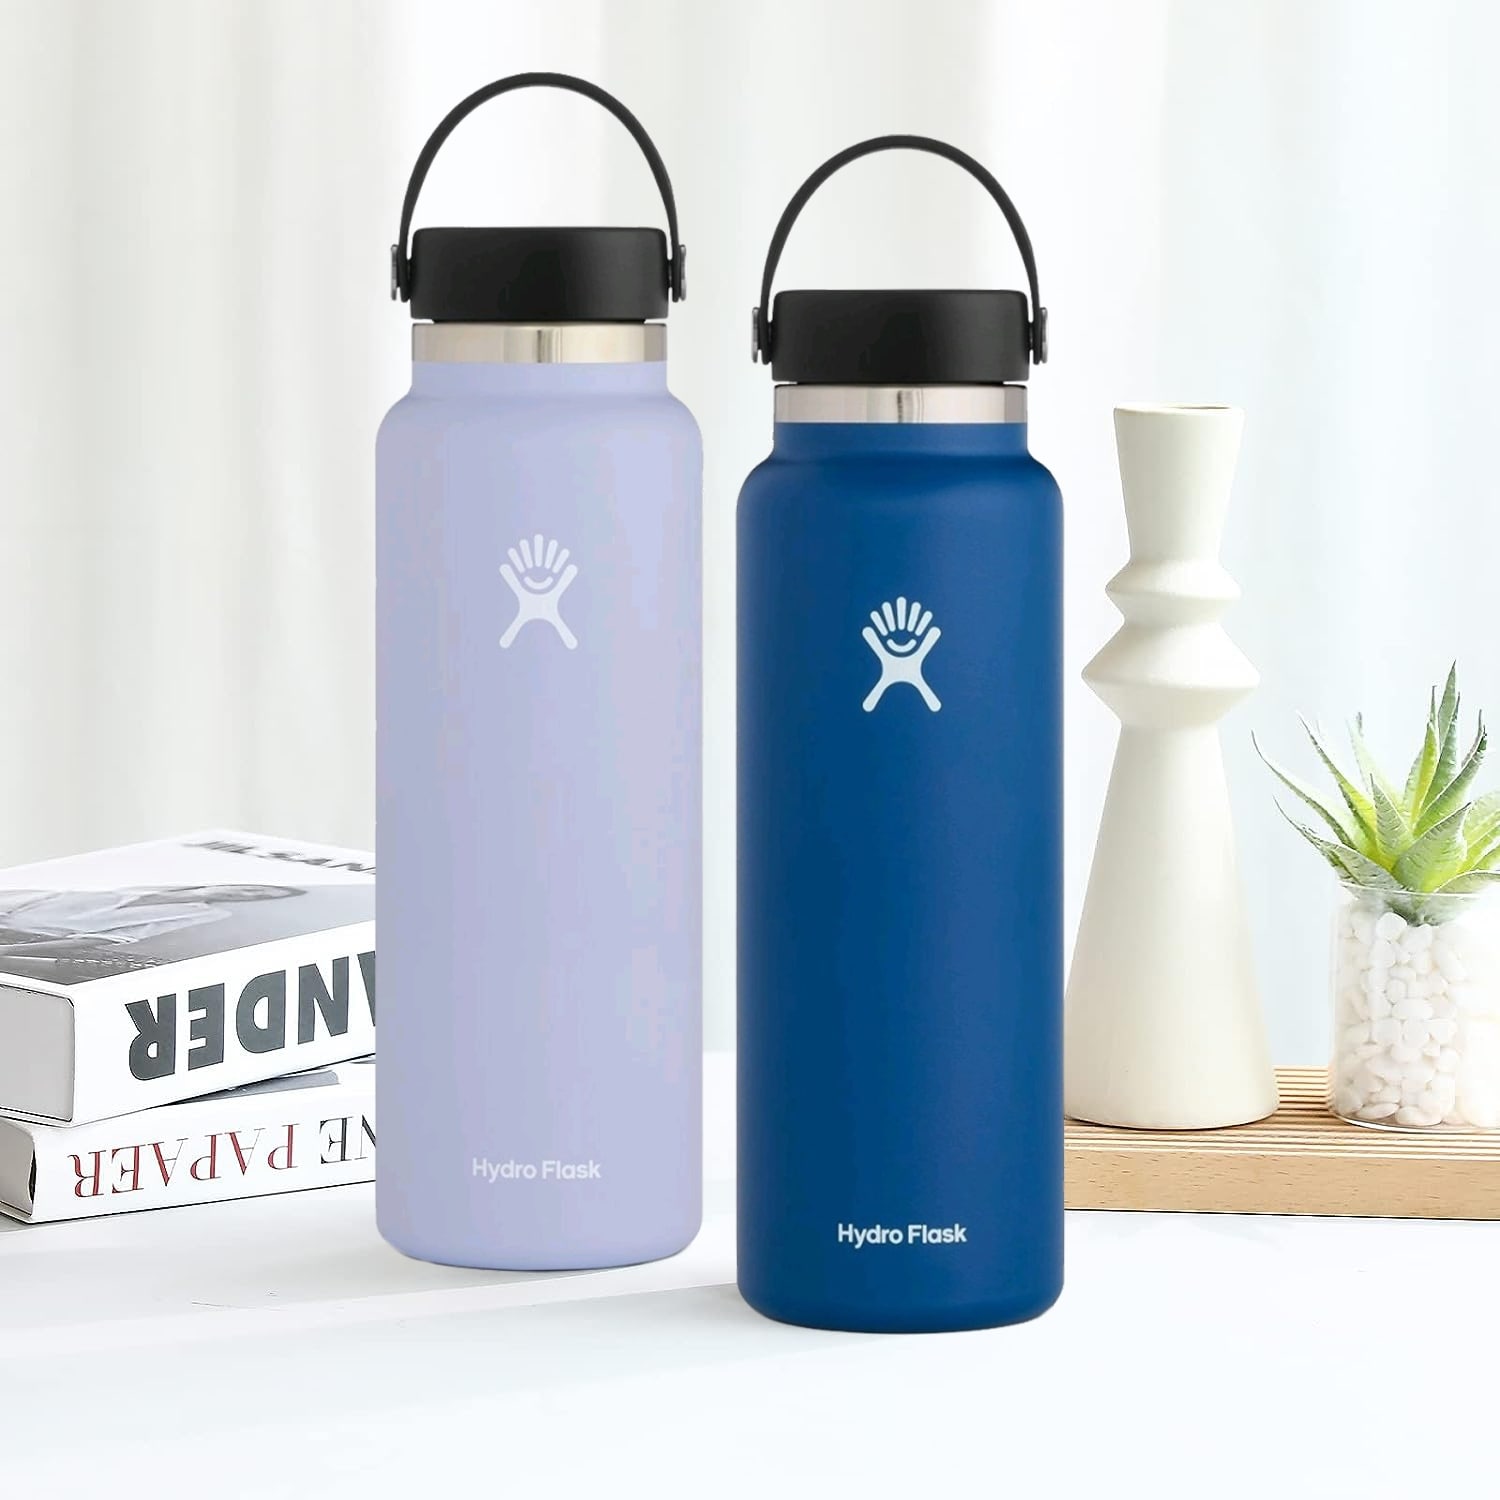 https://ak1.ostkcdn.com/images/products/is/images/direct/2fac2410cd15e93d91e856ffcd8c482ba94490bb/Hydro-Flask-40-oz-Wide-Mouth-Leak-Proof-Water-Bottle.jpg